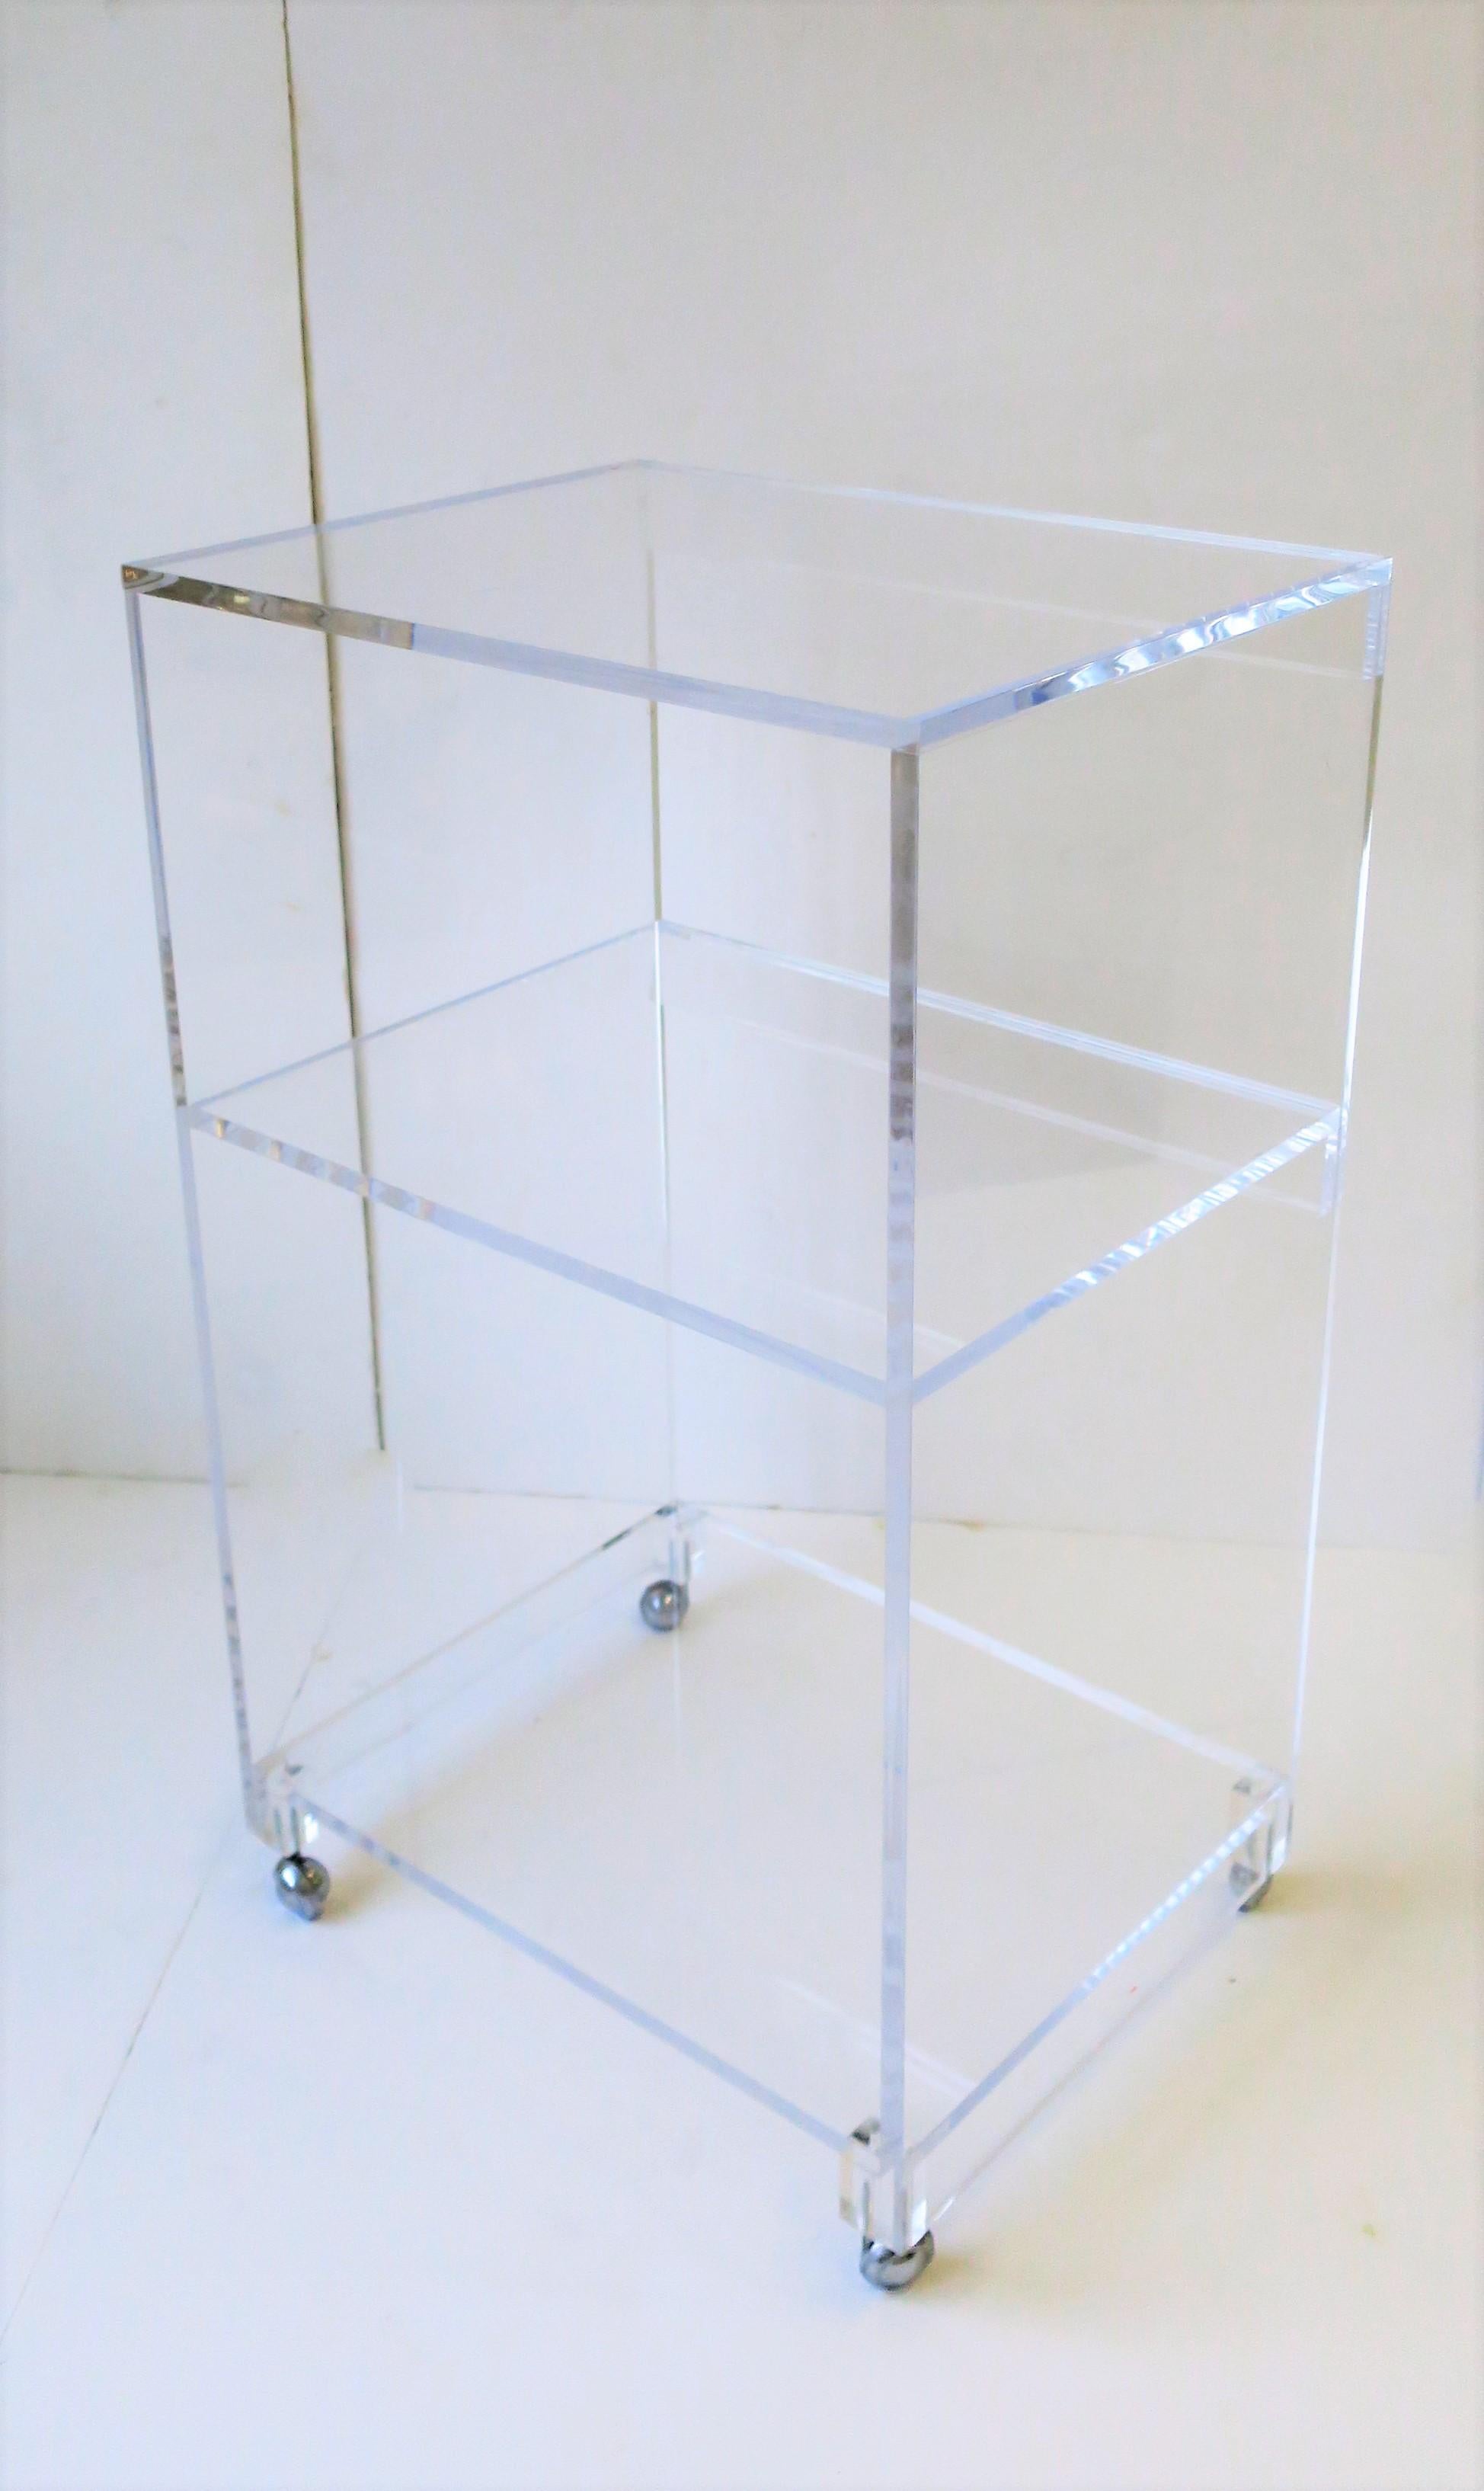 A substantial Lucite/acrylic bar cart, storage shelf, bookcase or cabinet on caster wheels. Piece has three shelf areas; top, middle and lower shelf. 

Piece measures: 30